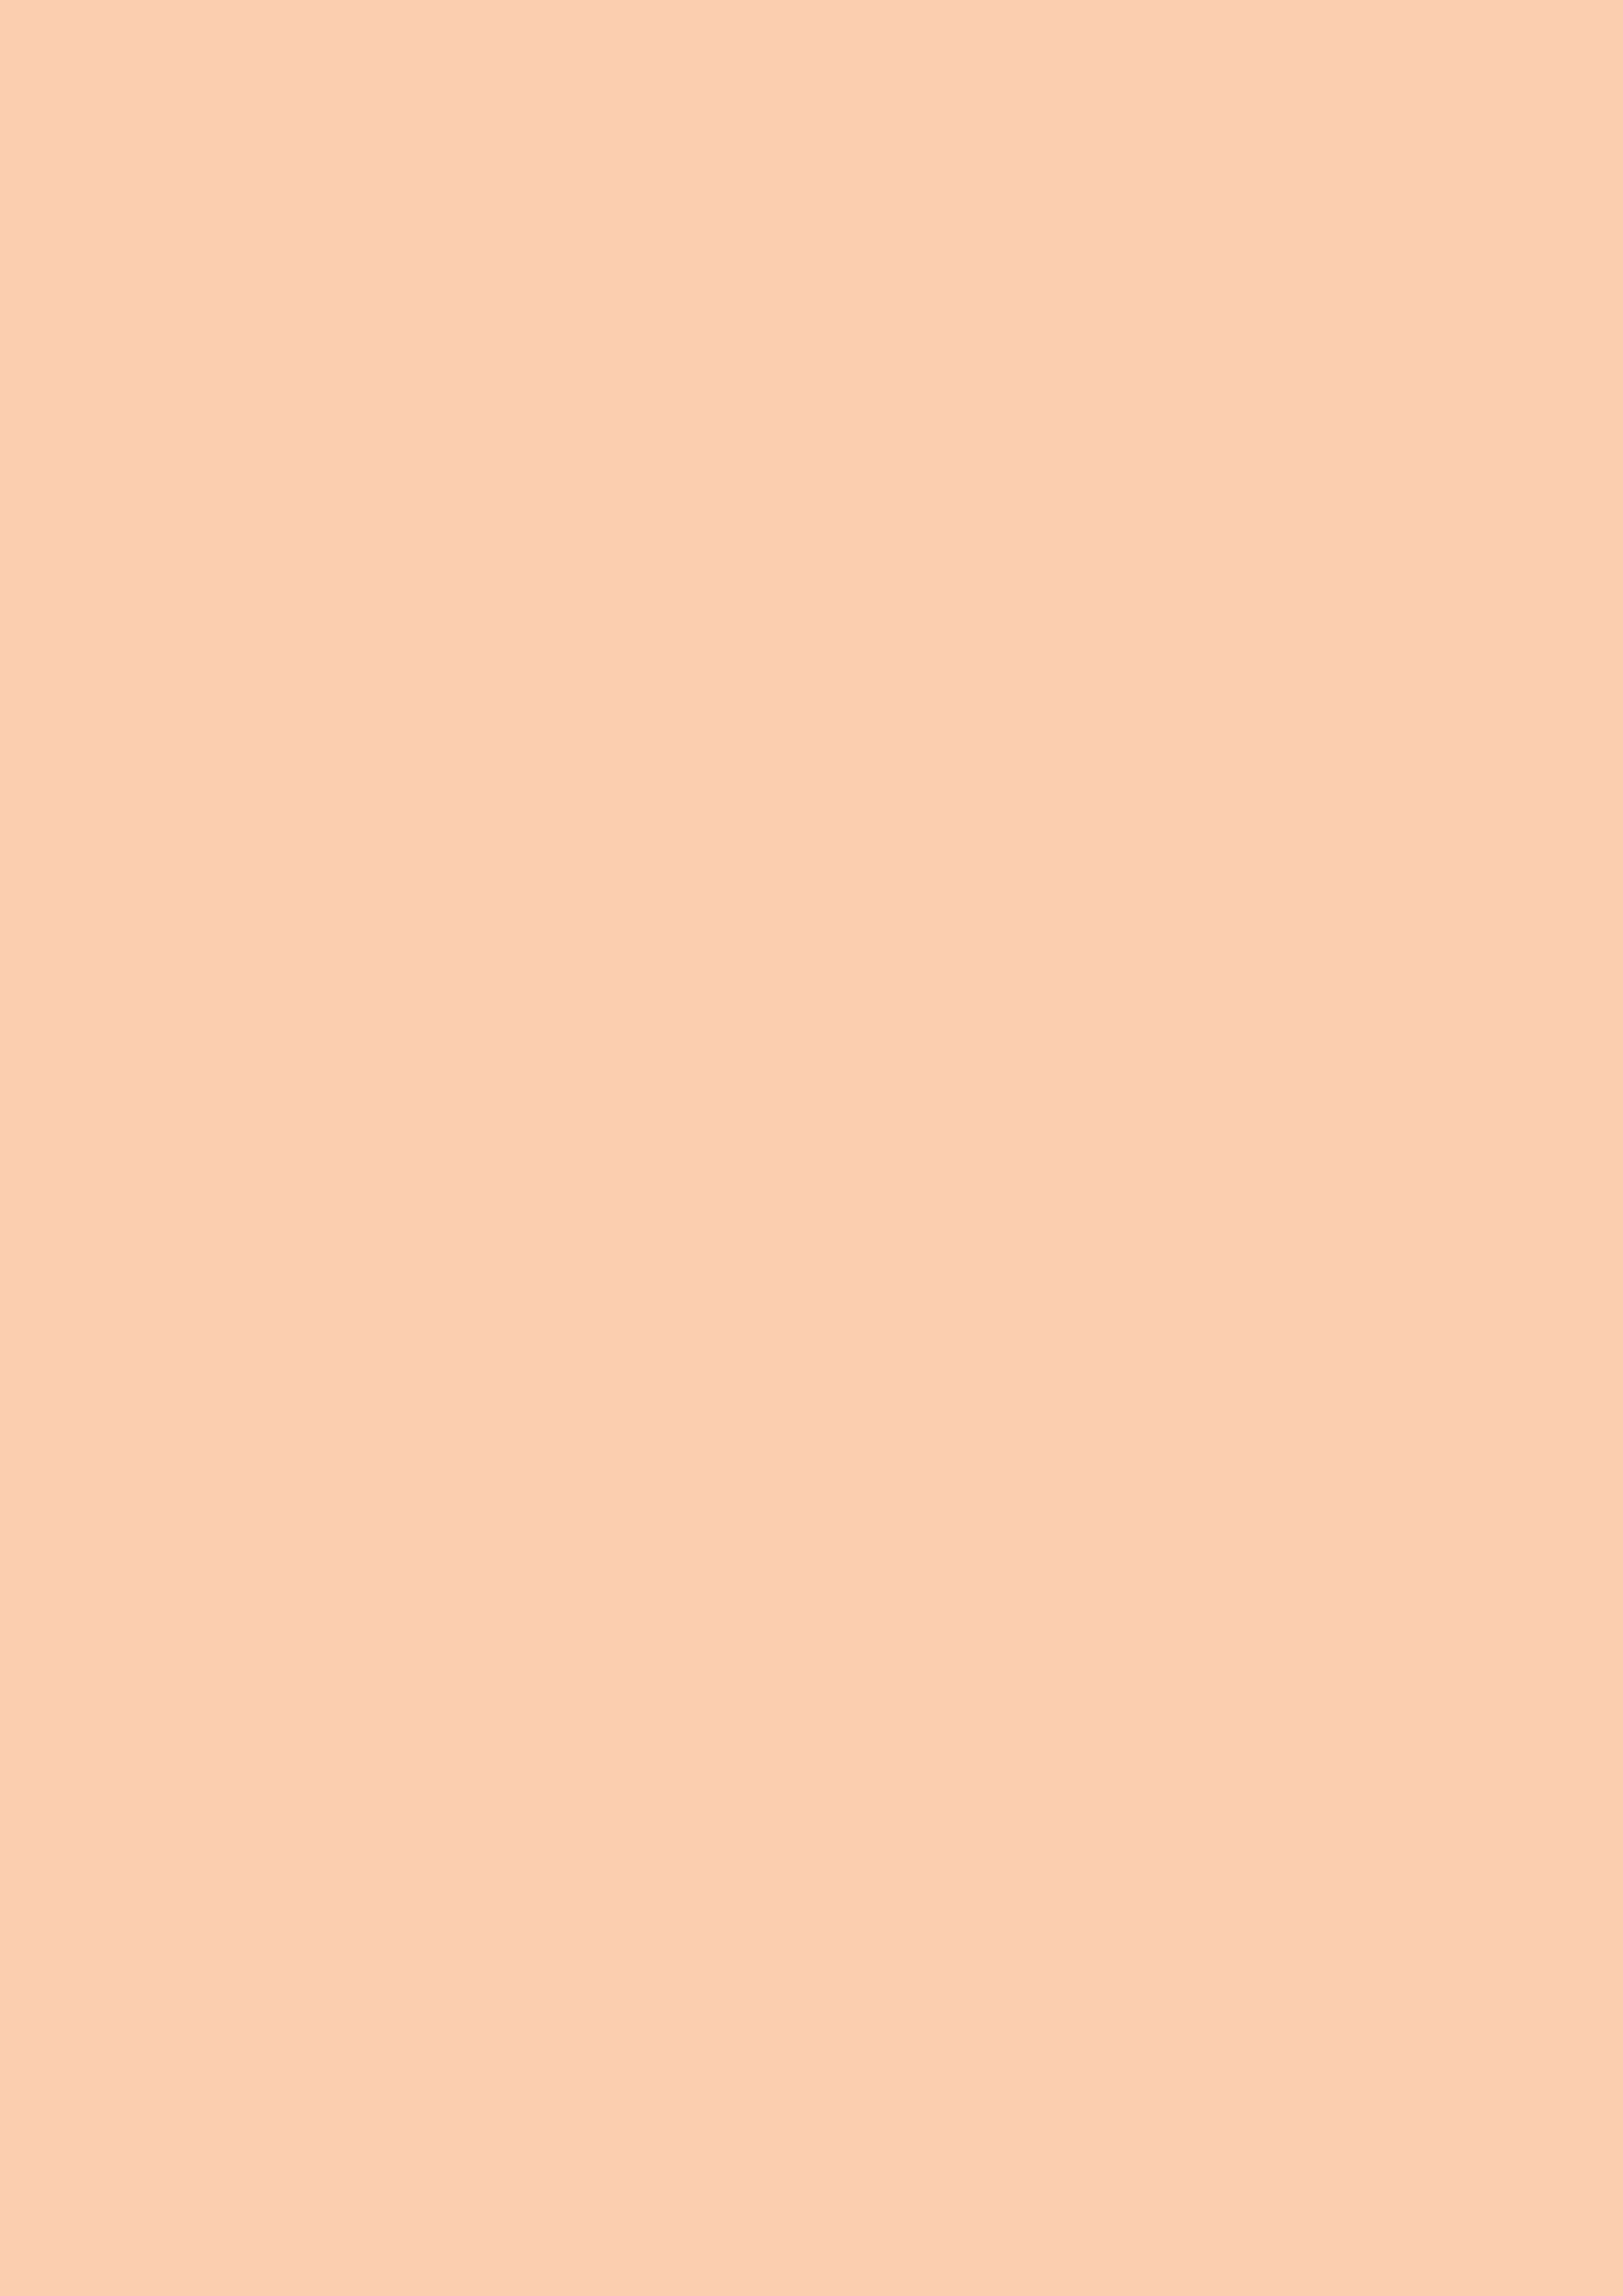 2480x3508 Apricot Solid Color Background